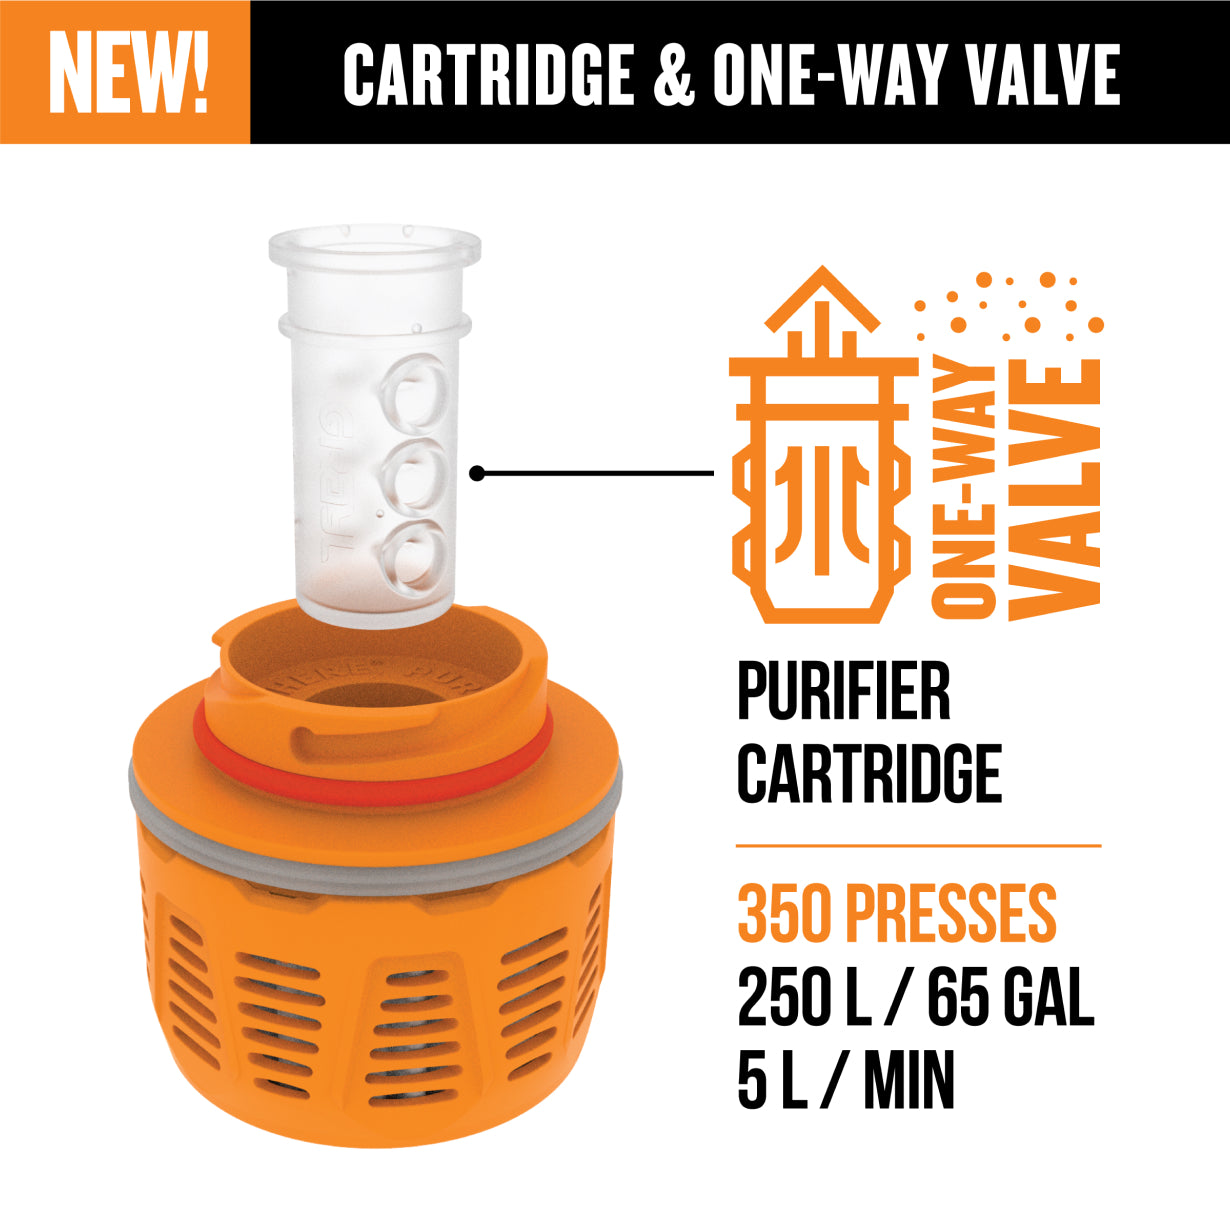 NEW! Cartridge and One-Way drink mix valve.